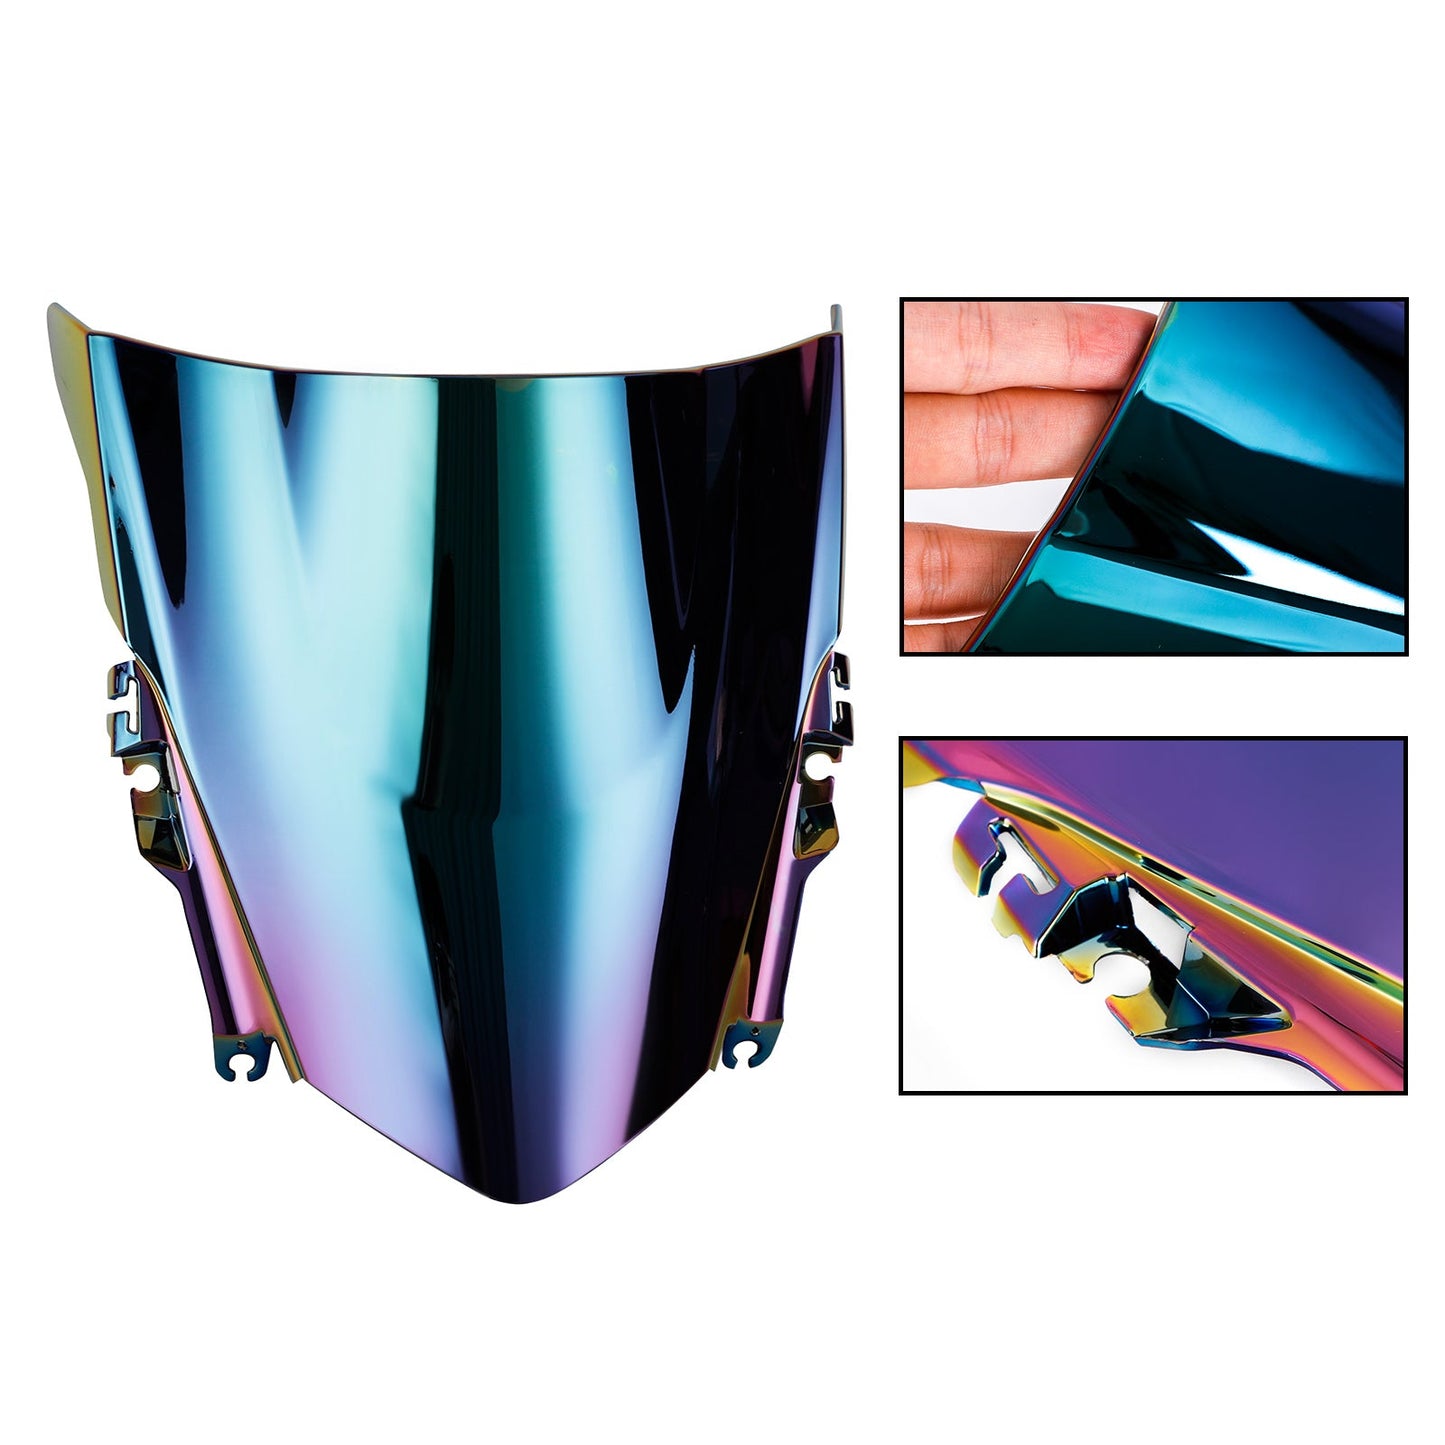 ABS Motorcycle Windshield WindScreen fit for HONDA CBR500R 2013-2015